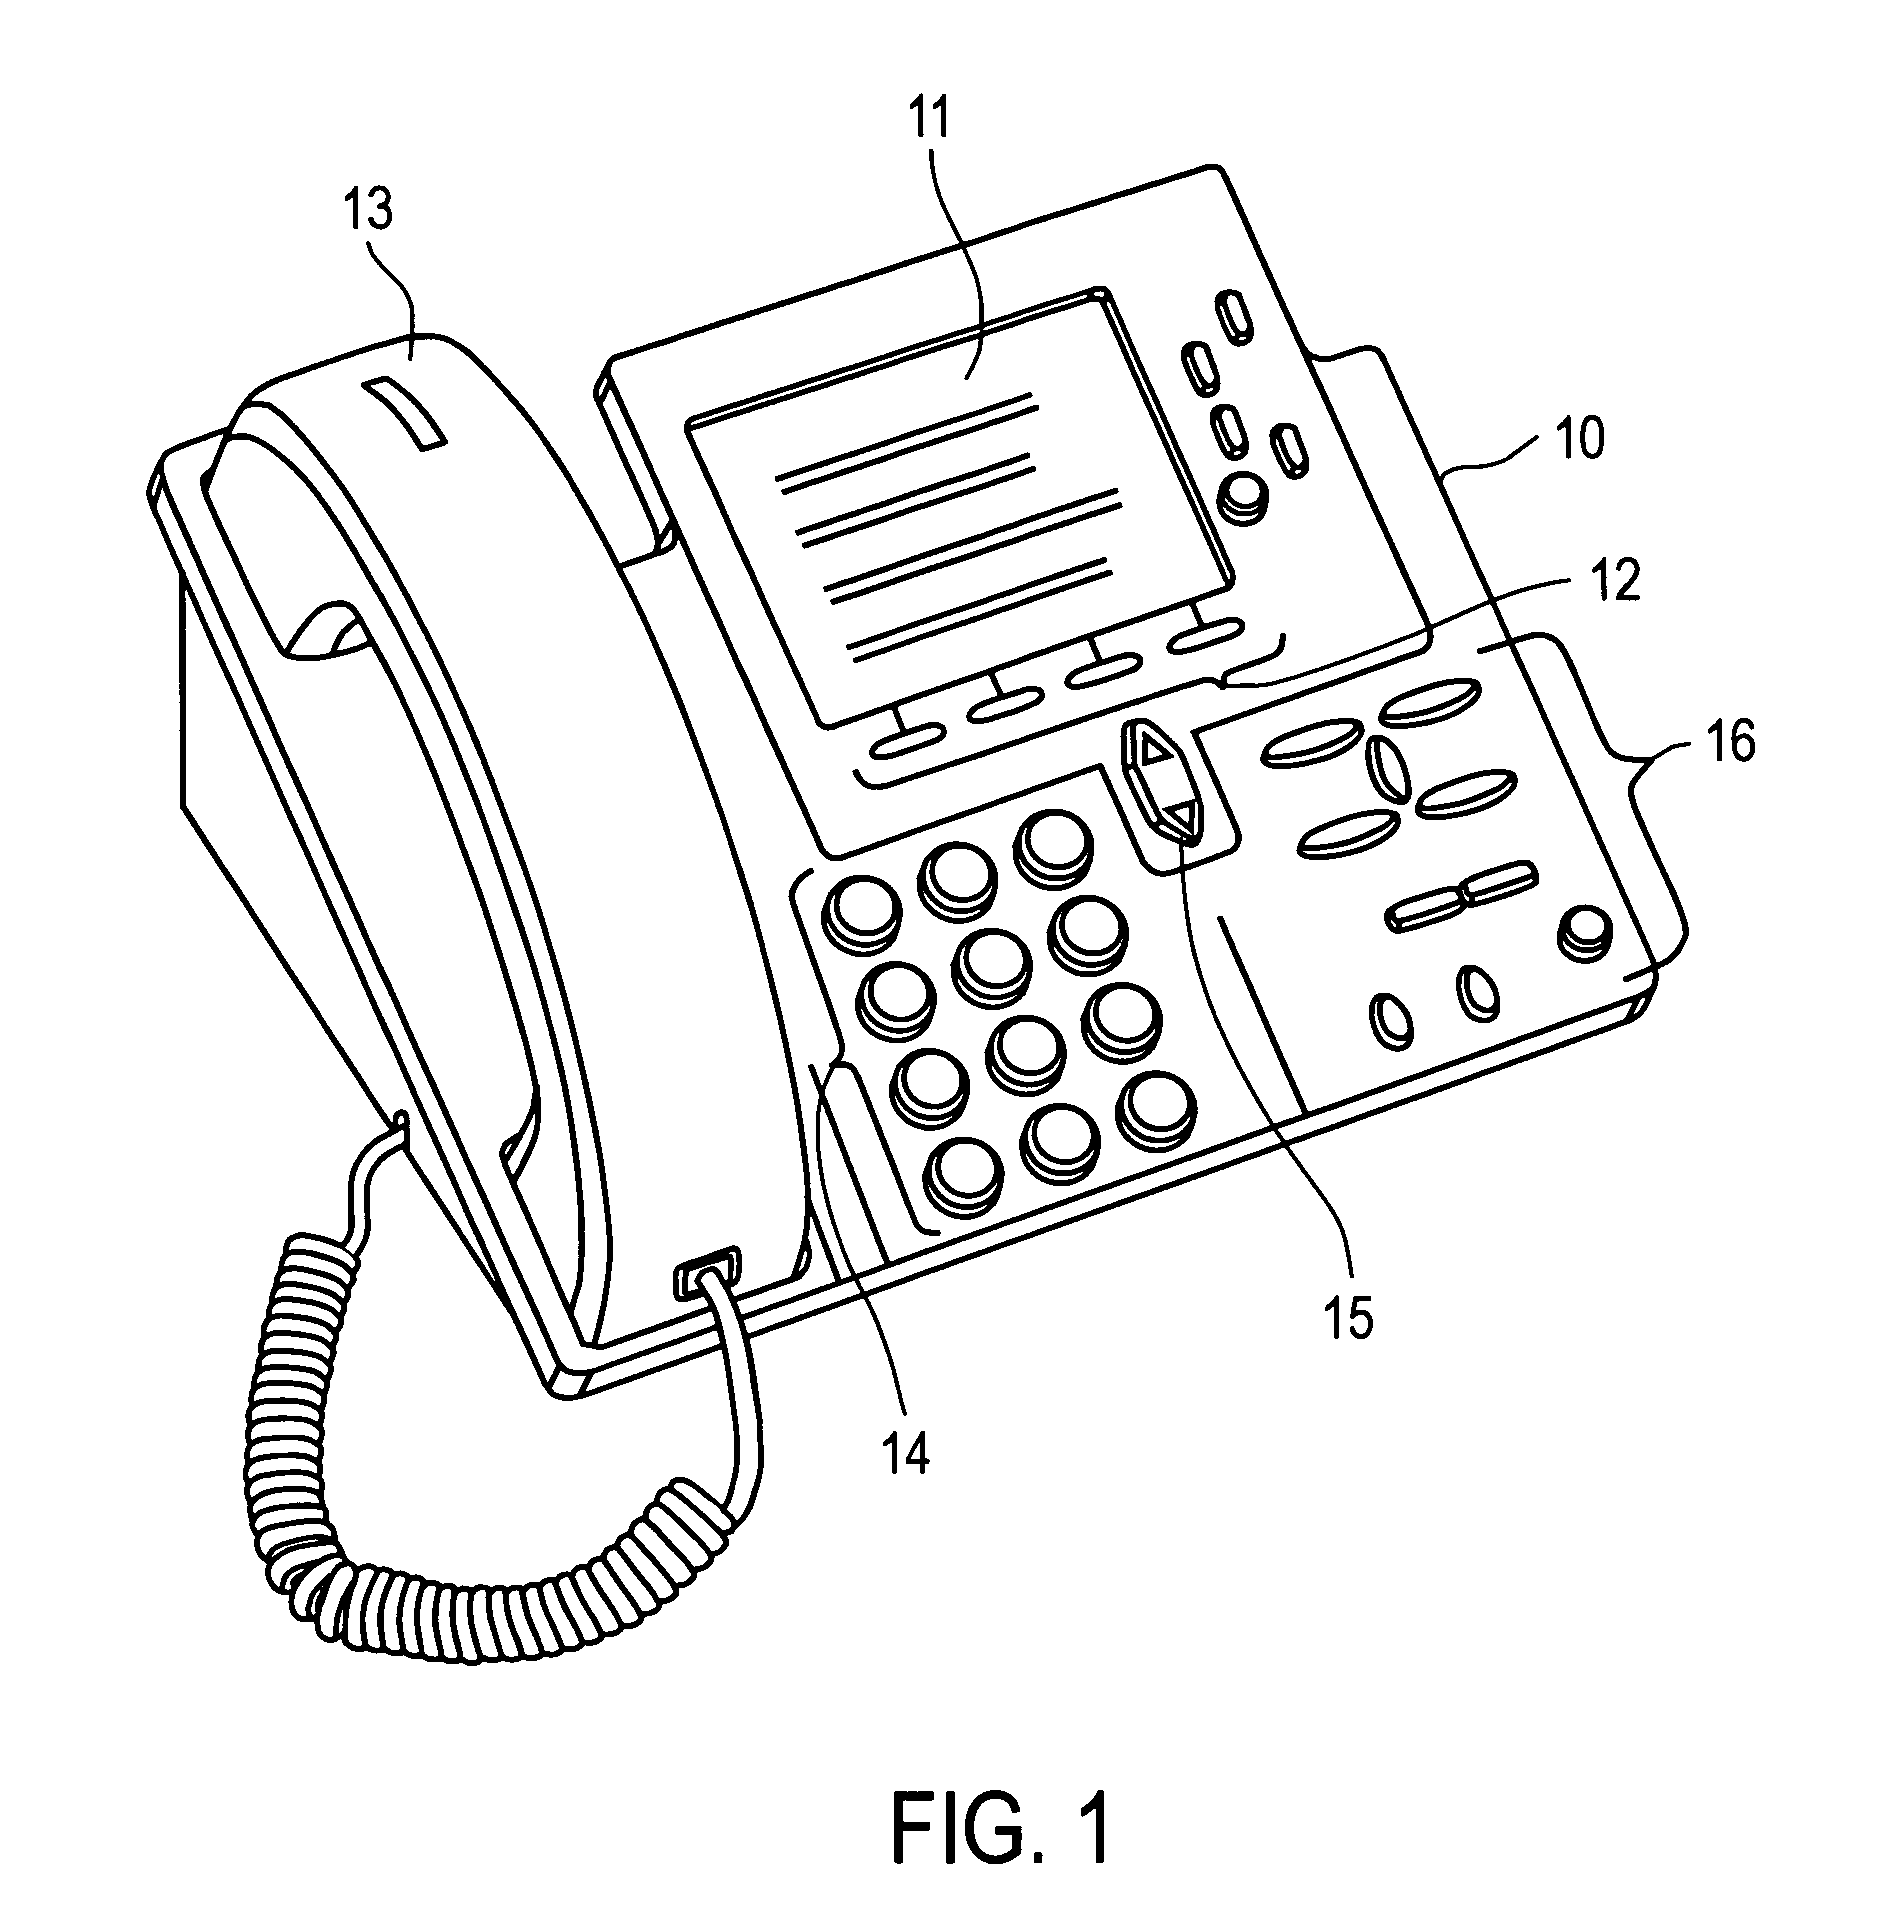 Dialing assistant that includes an interface with a geographic display